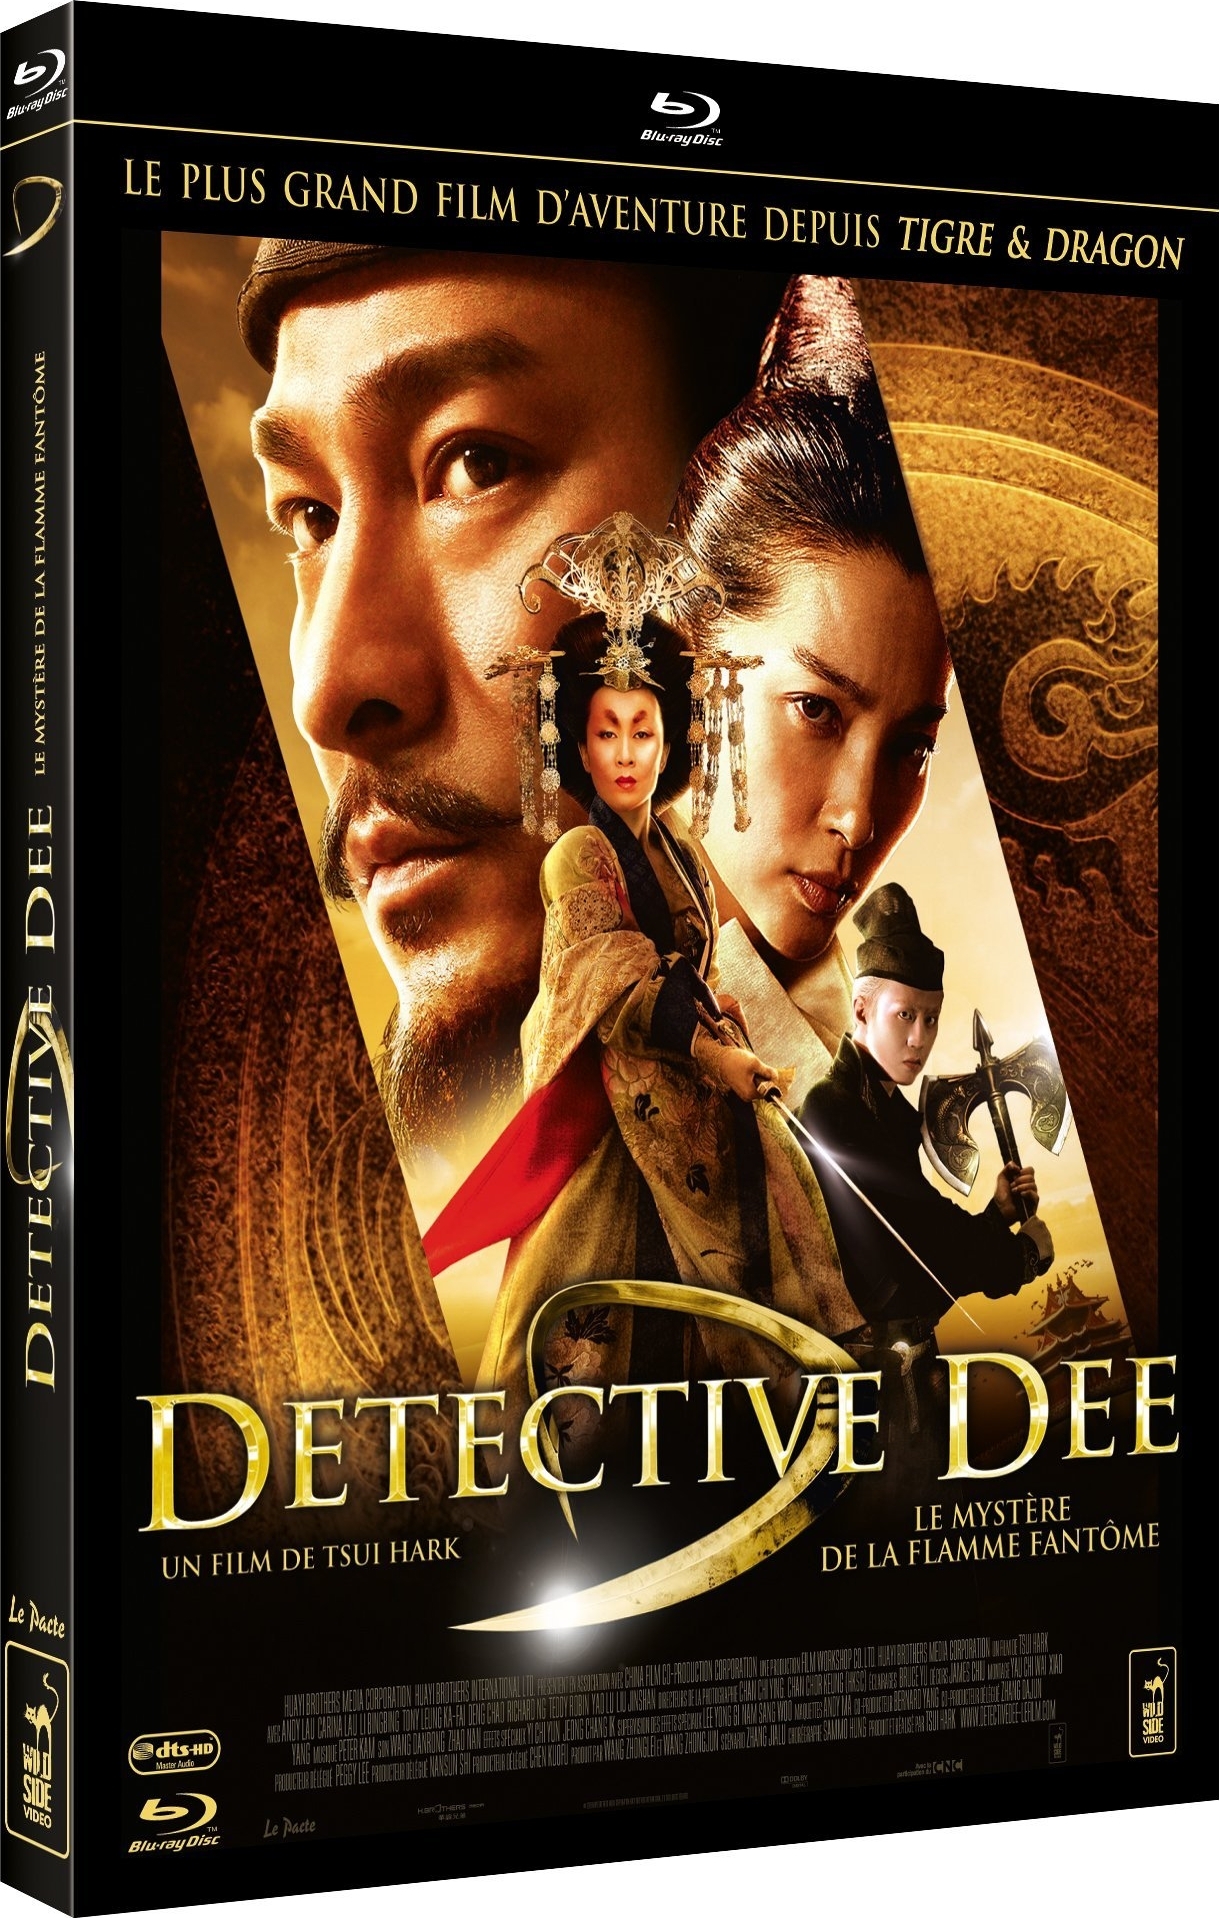 HQ Detective Dee & The Mystery Of The Phantom Flame Wallpapers | File 1329.16Kb